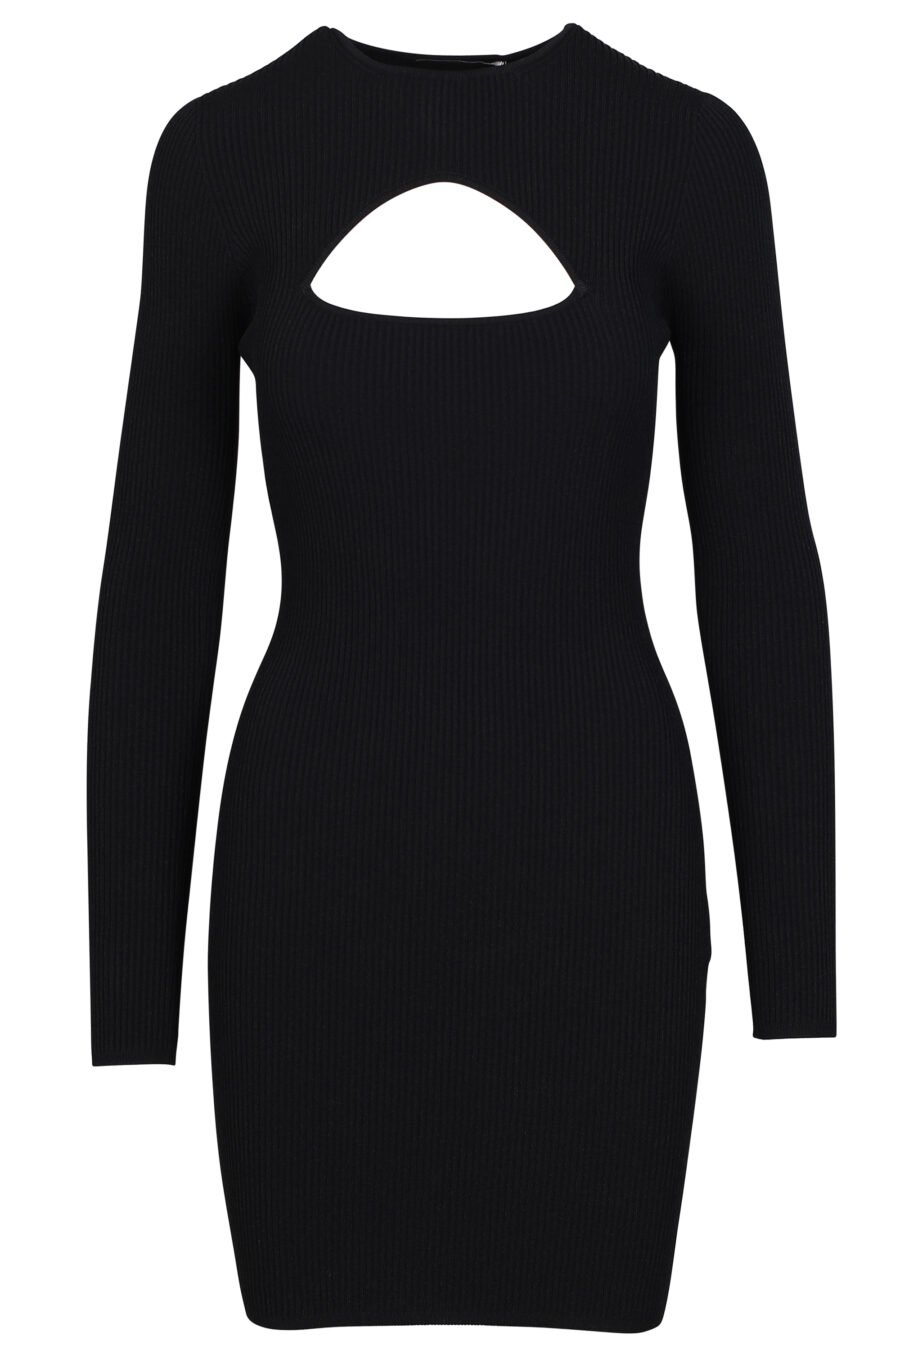 Short black "Cut-Out" dress with long sleeves and neckline - 8054148010836